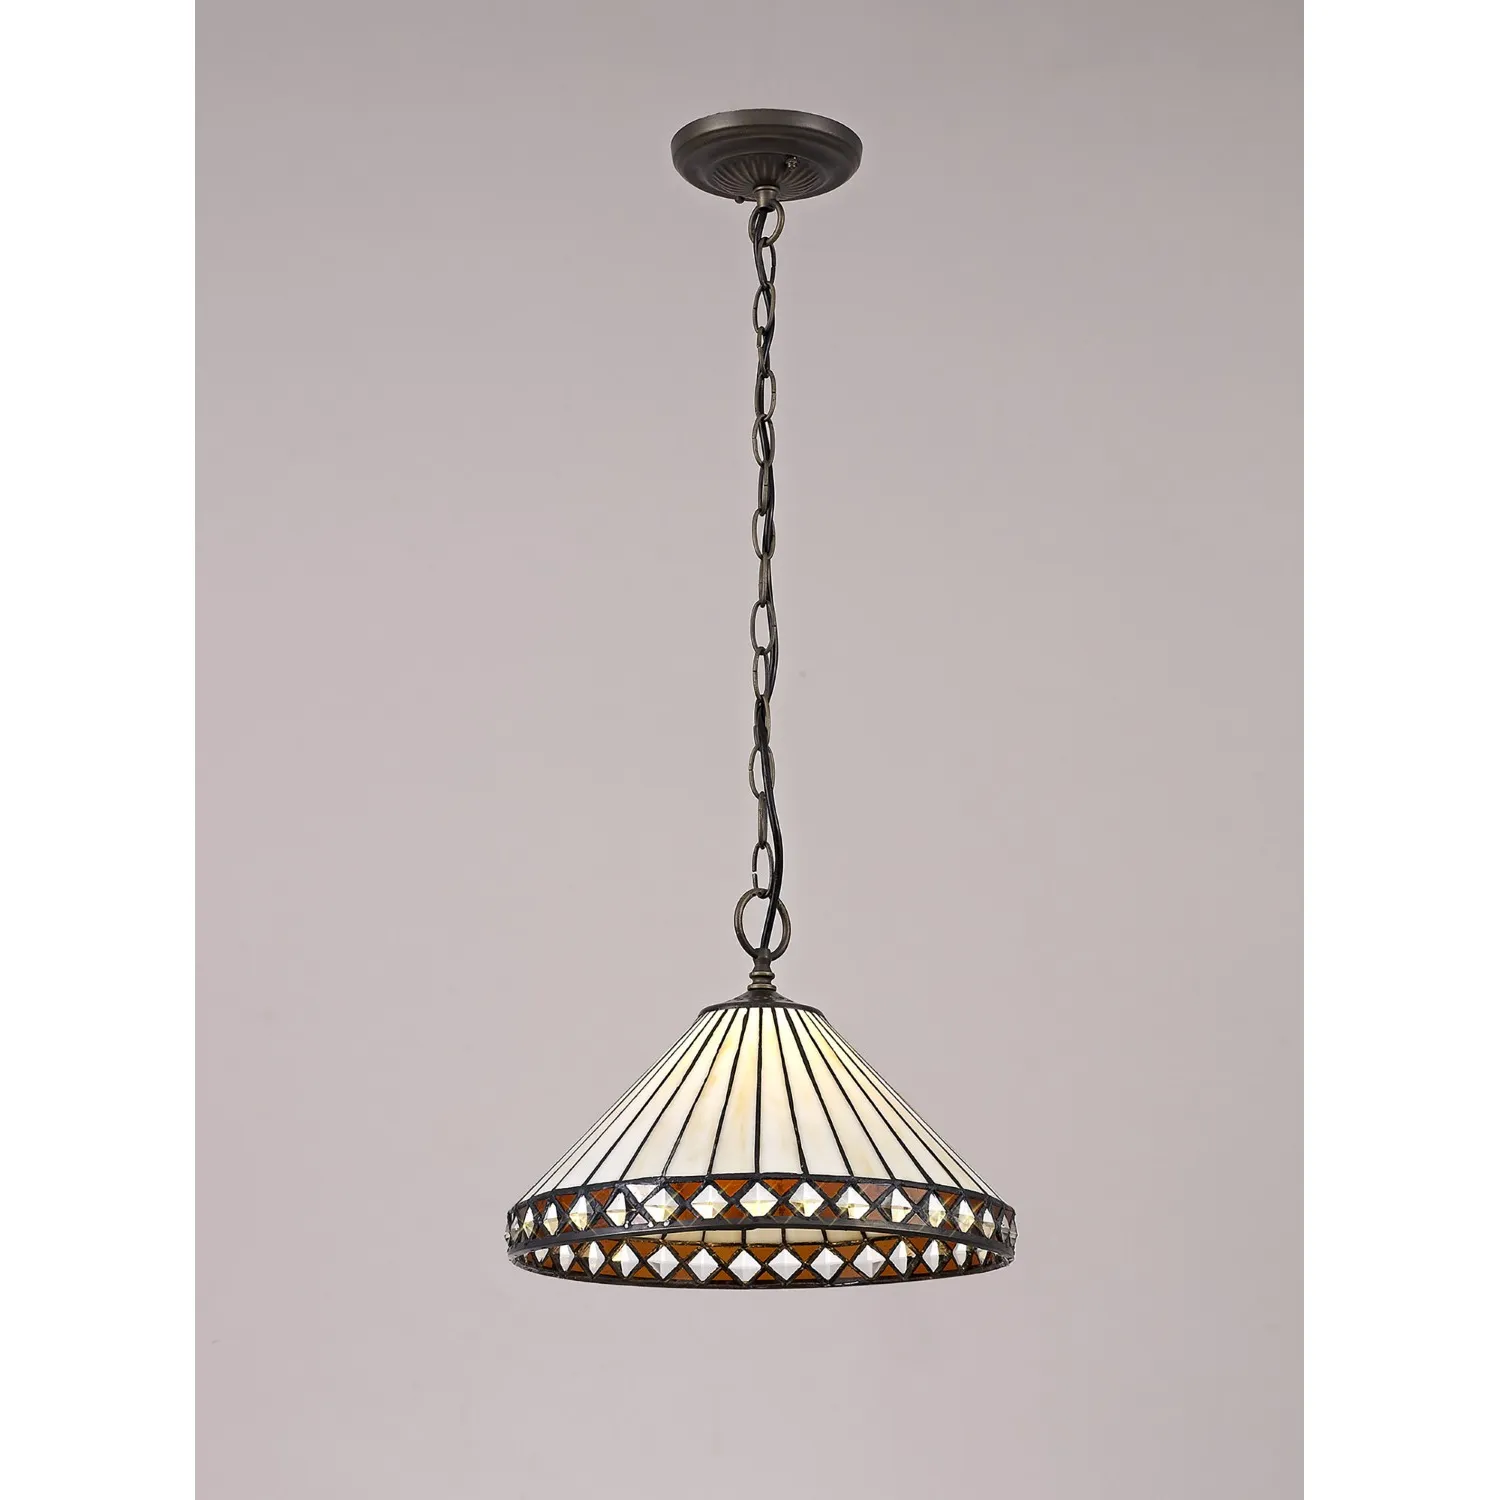 Rayleigh 1 Light Downlighter Pendant E27 With 30cm Tiffany Shade, Amber Cream Crystal Aged Antique Brass